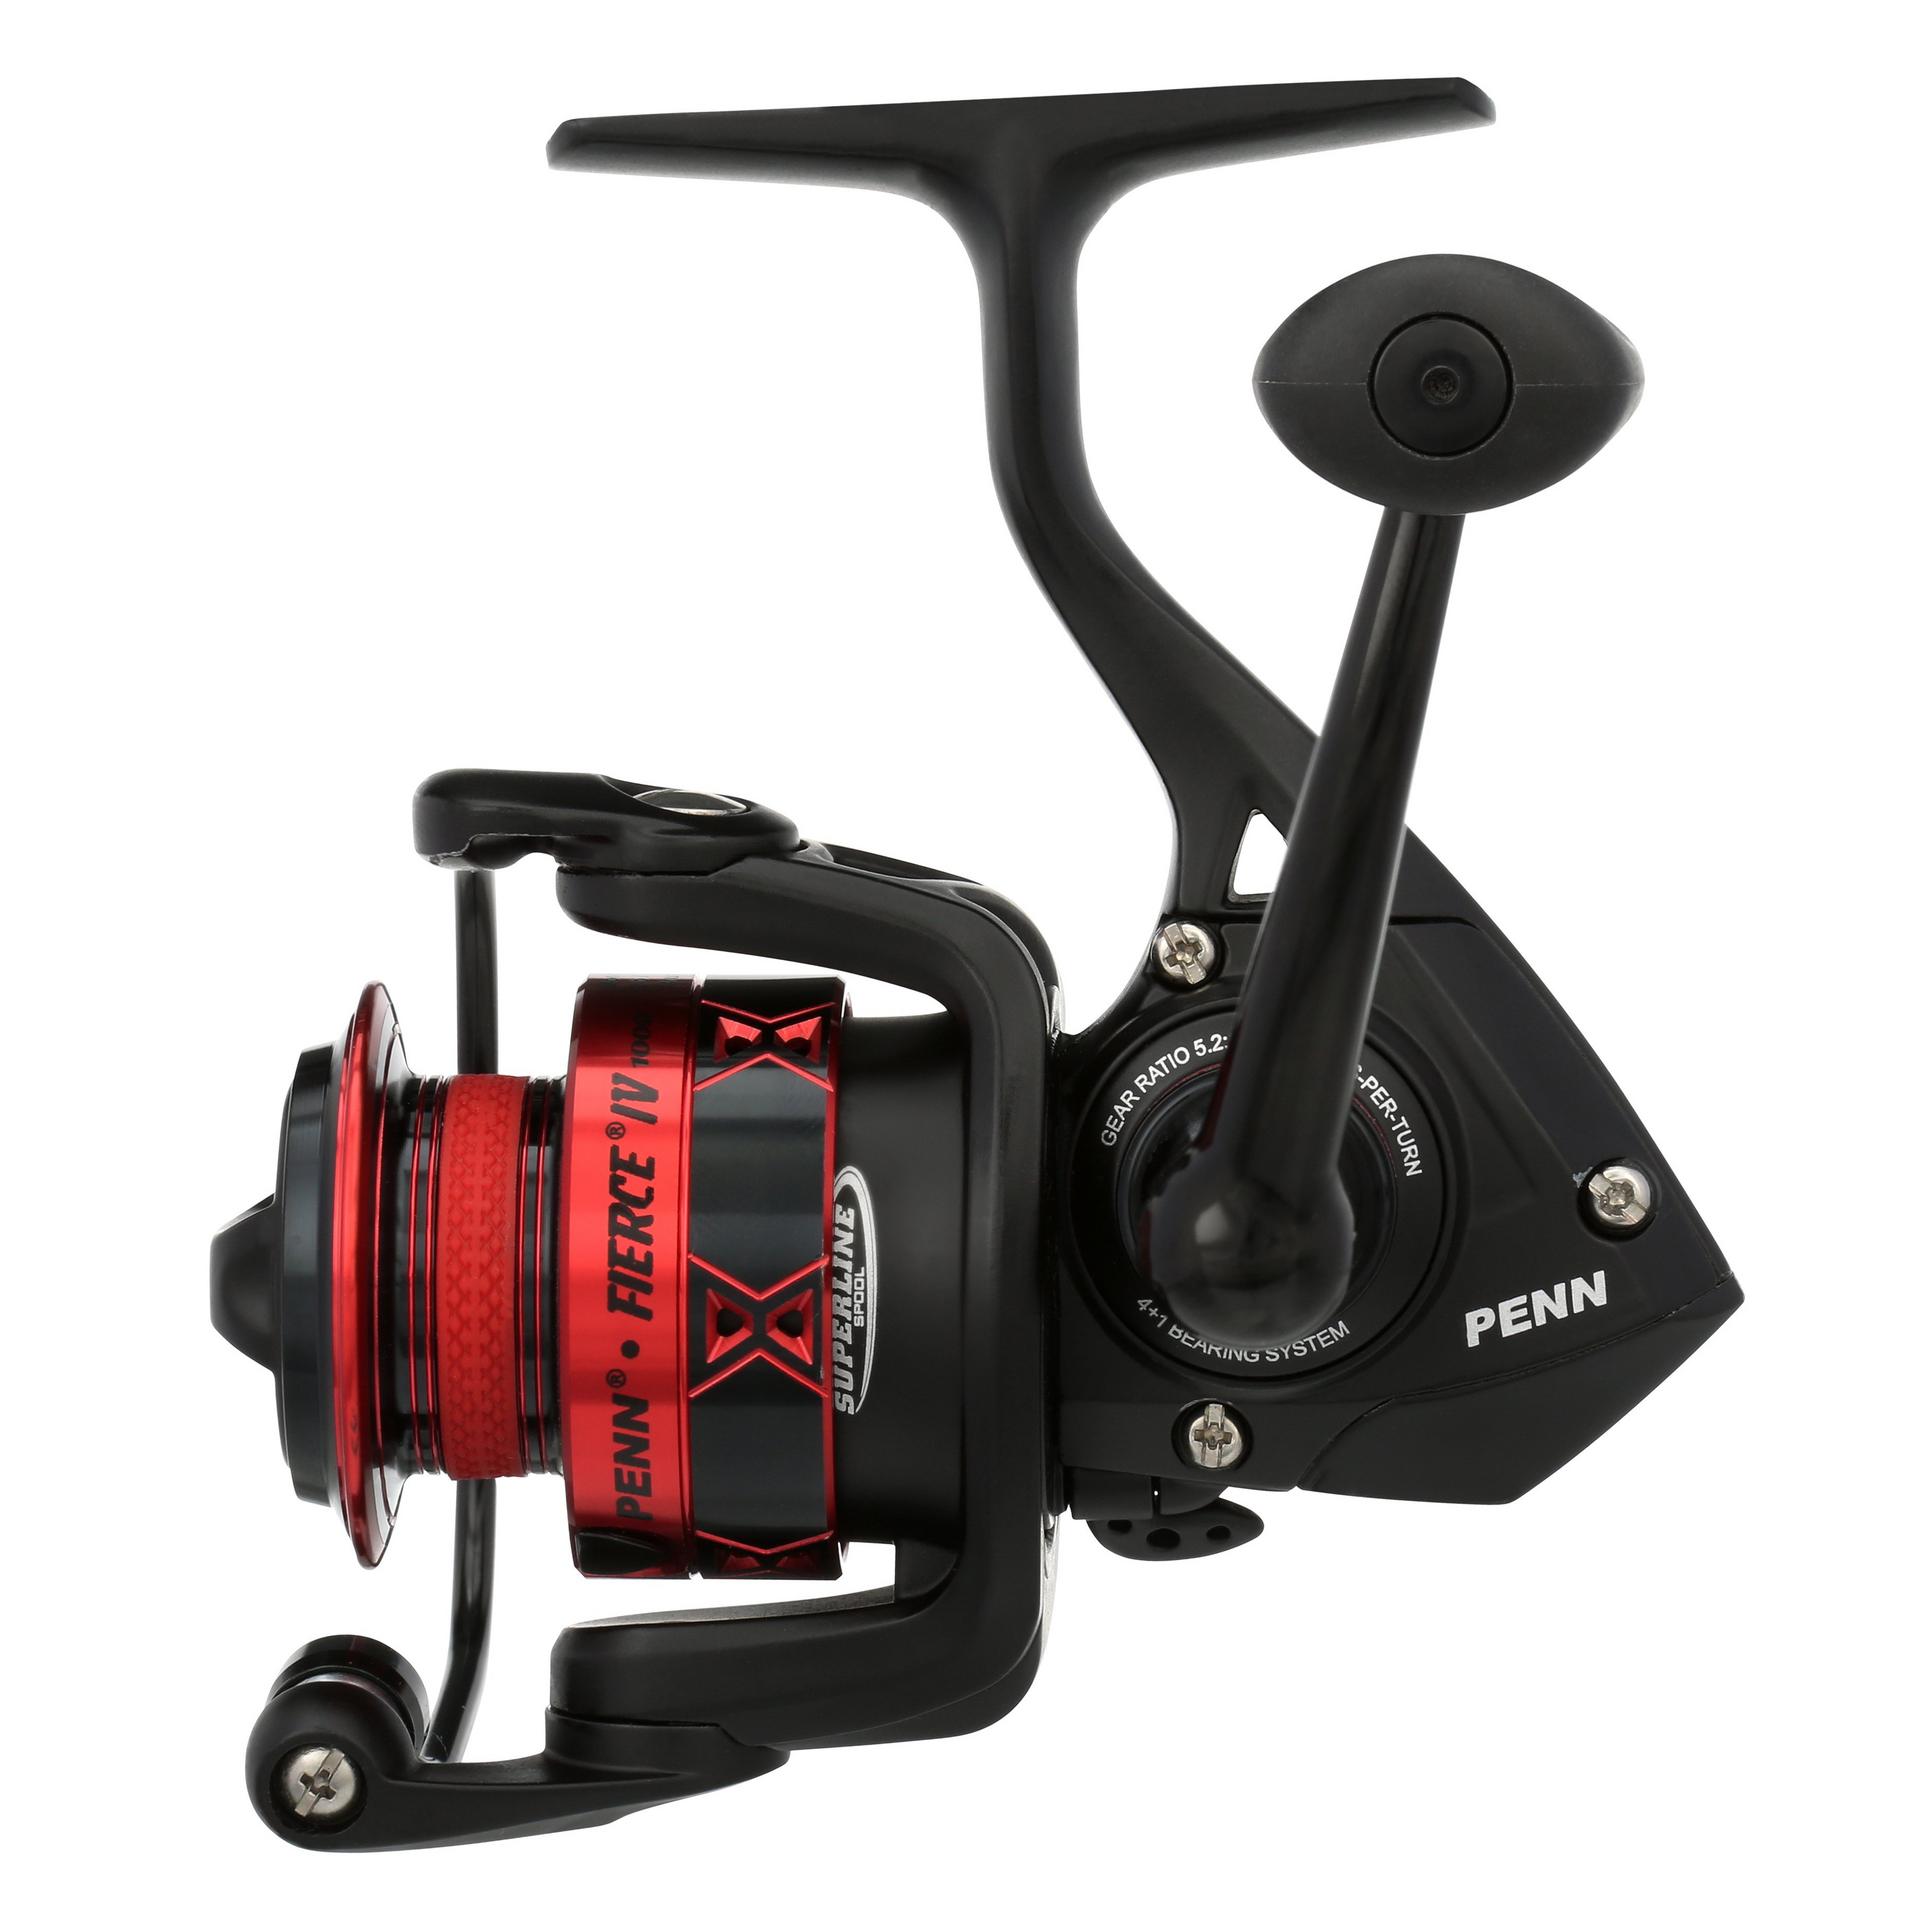 PENN Fierce IV Saltwater Spinning Reel – Versatile Sea Fishing Reel For  Boat, Kayak, Shore, Spinning, Jigging, Surf, and All-Round Use : Buy Online  at Best Price in KSA - Souq is